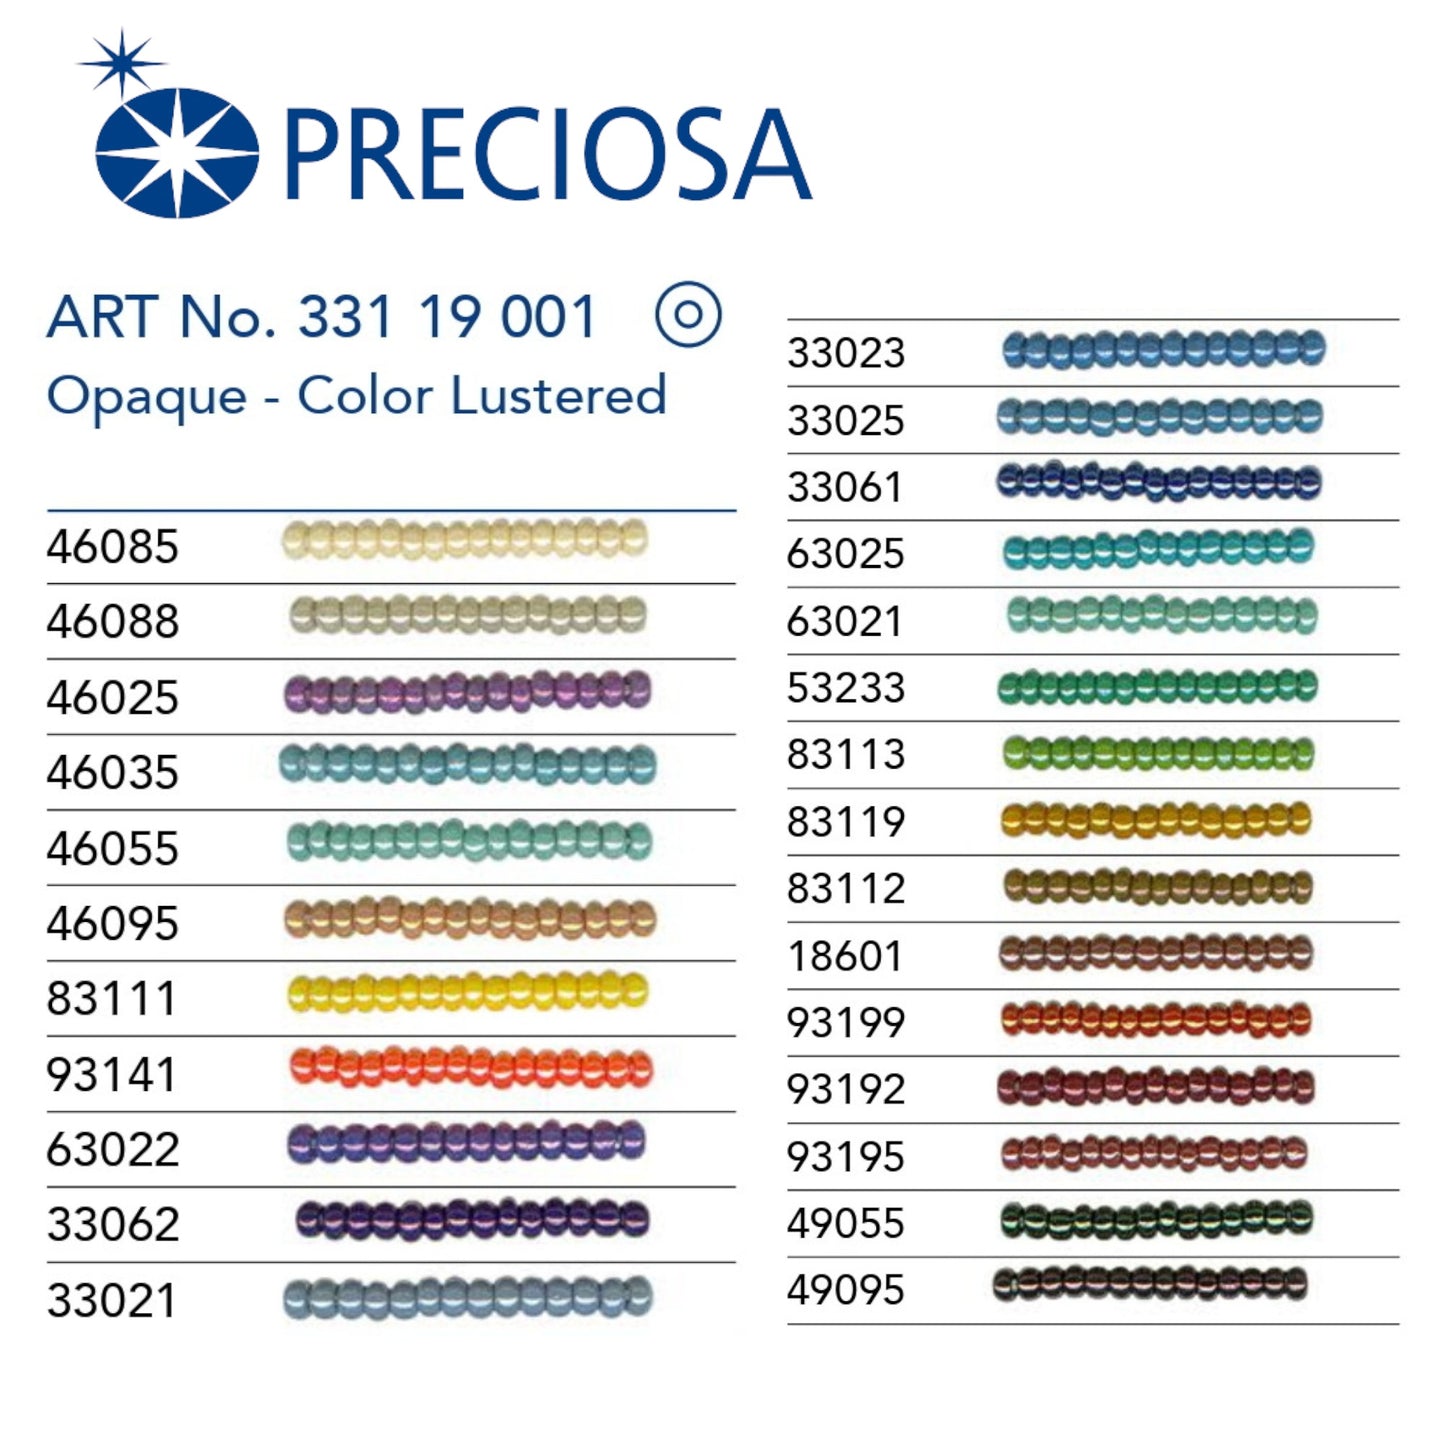 46025 Czech Seed Beads Preciosa Rocailes Opaque - Color Lustered - VadymShop